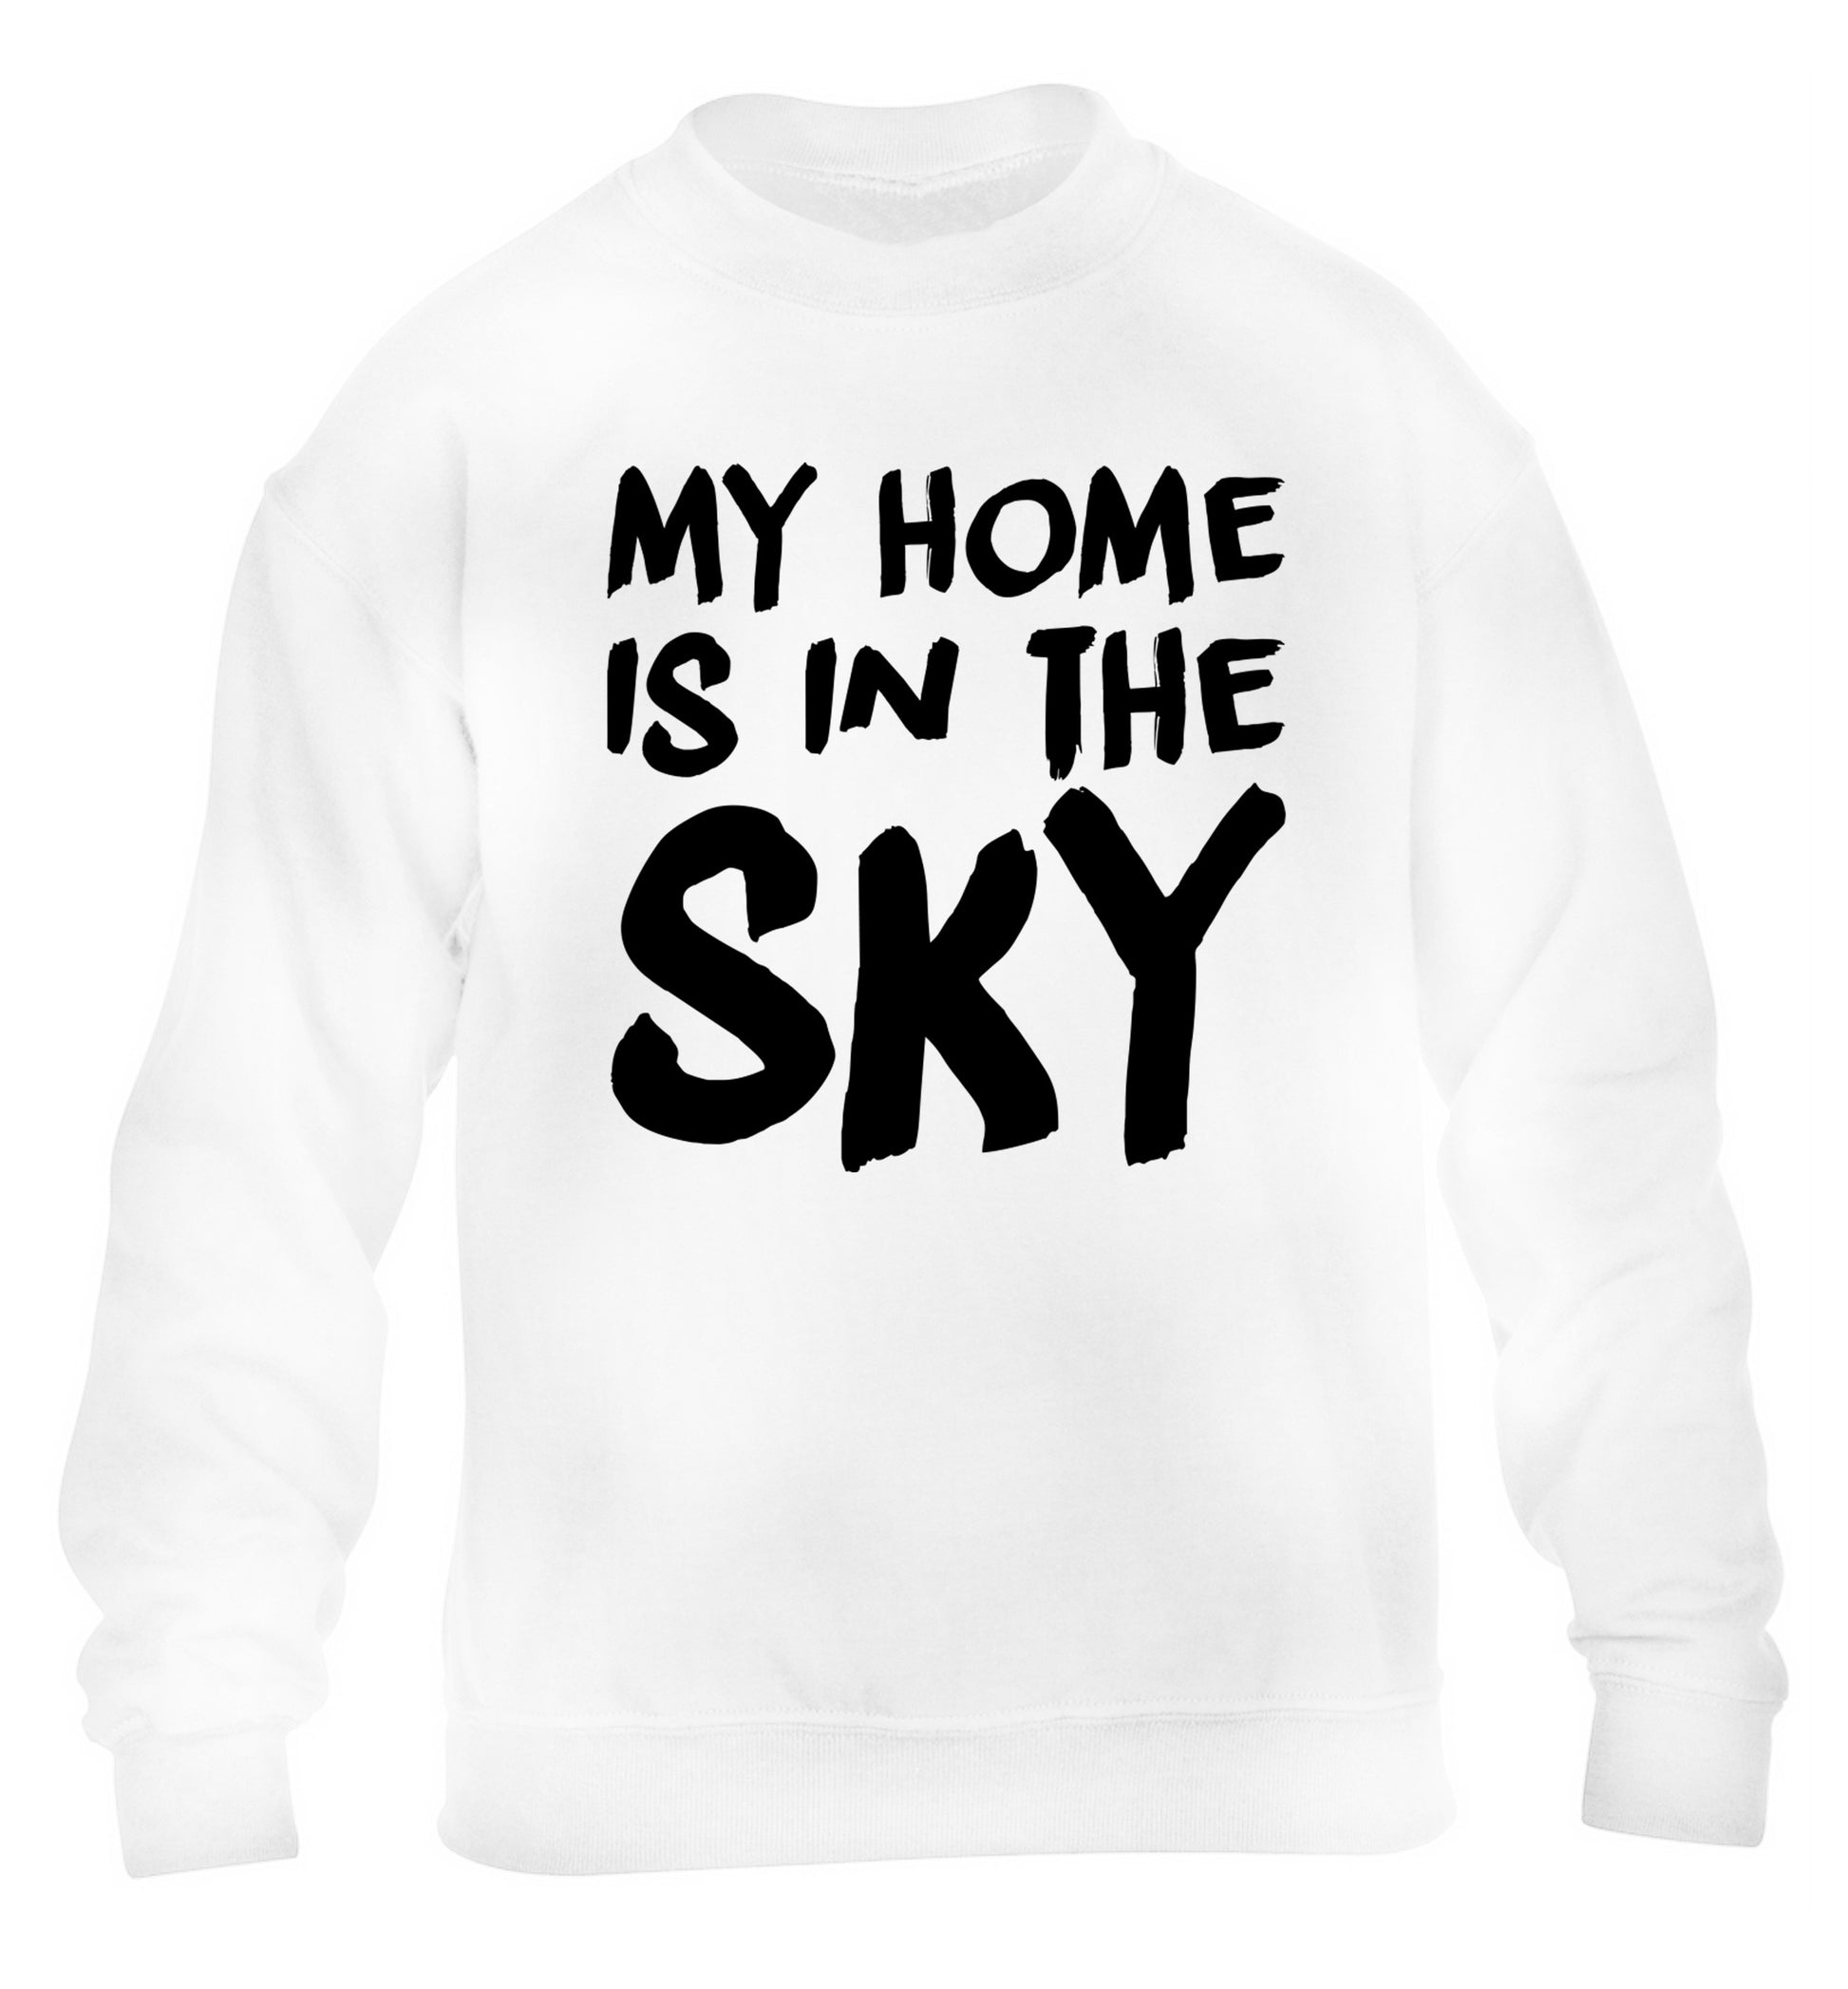 My home is in the sky children's white sweater 12-14 Years